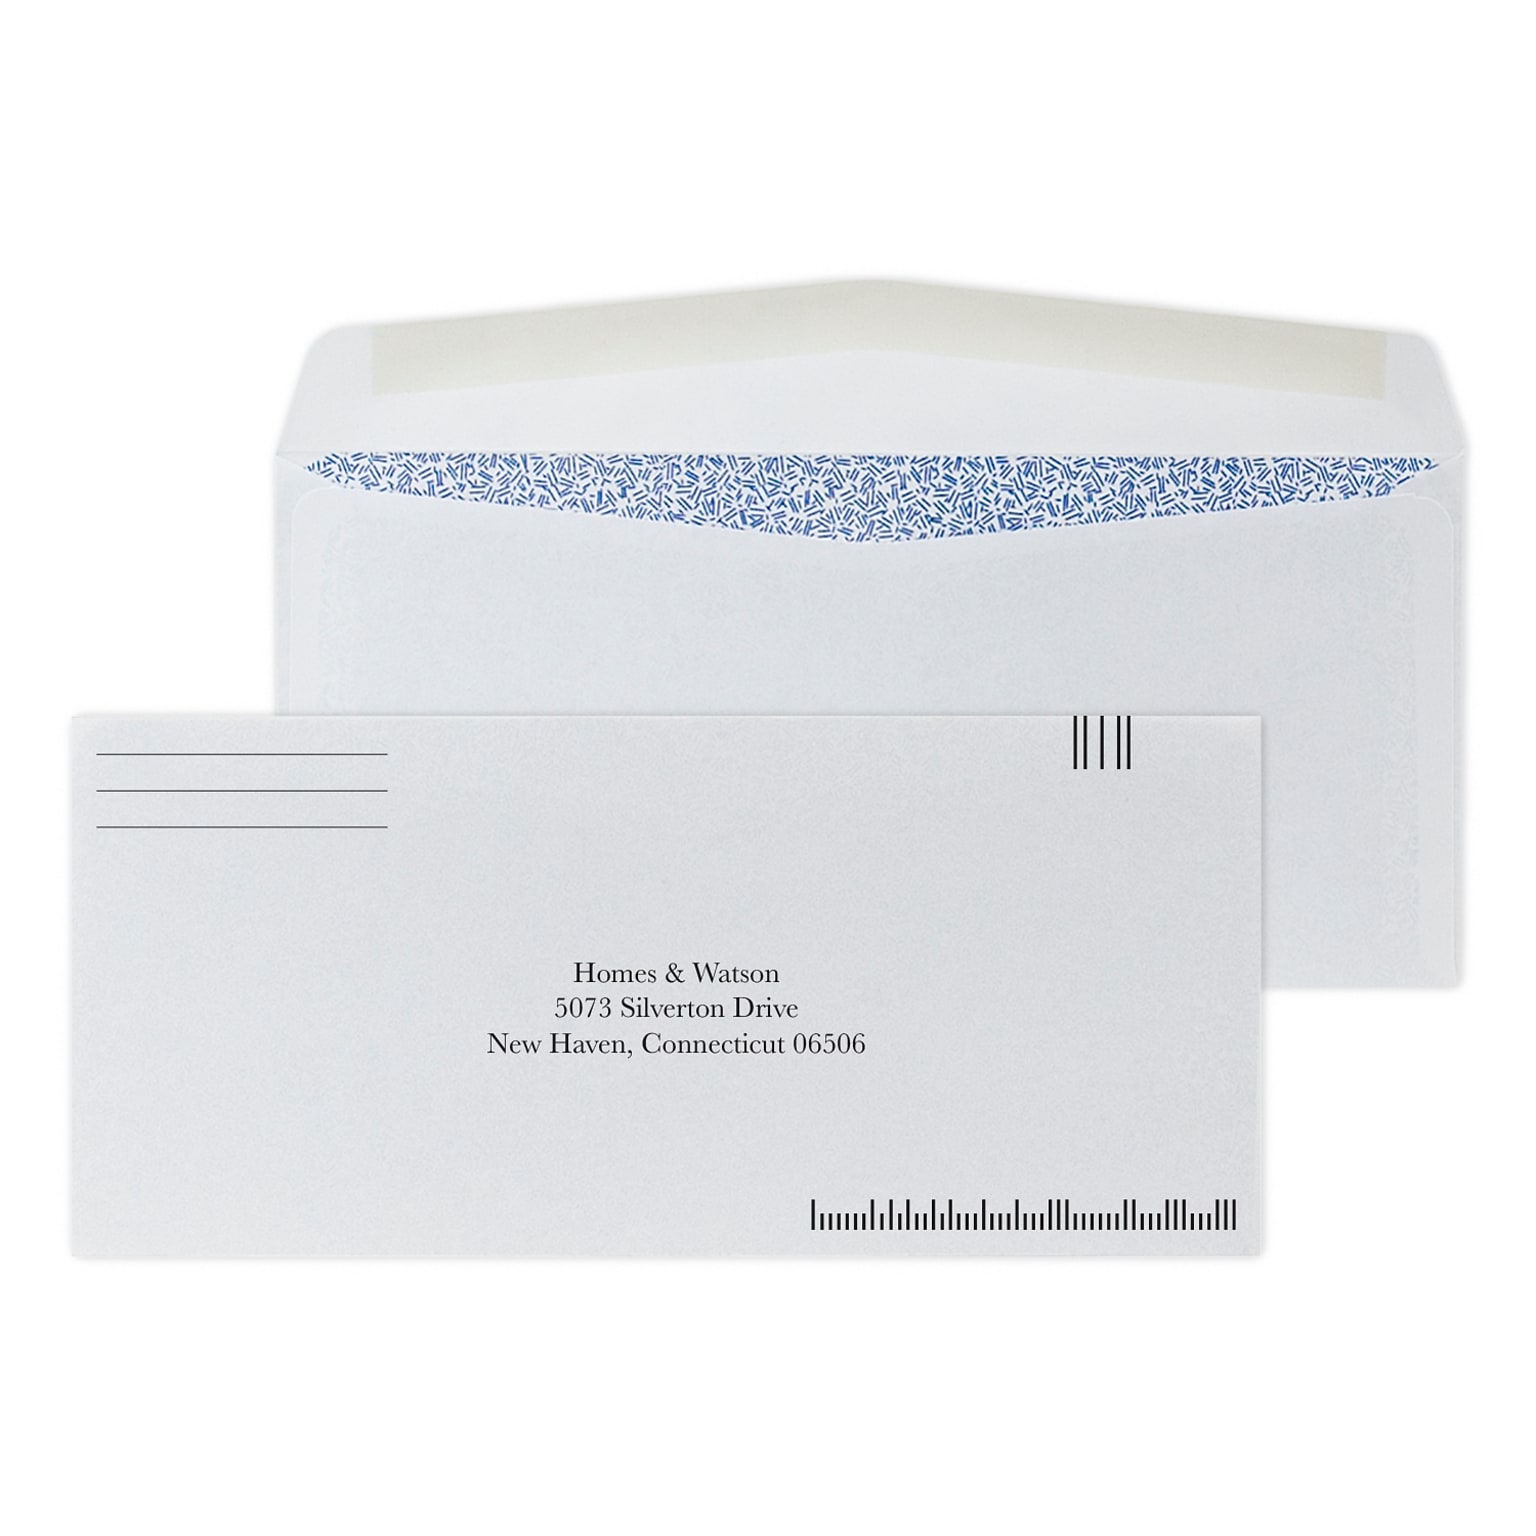 Custom #10 Barcode Standard Envelopes with Security Tint, 4 1/4 x 9 1/2, 24# White Wove, 1 Standard Ink, 250 / Pack